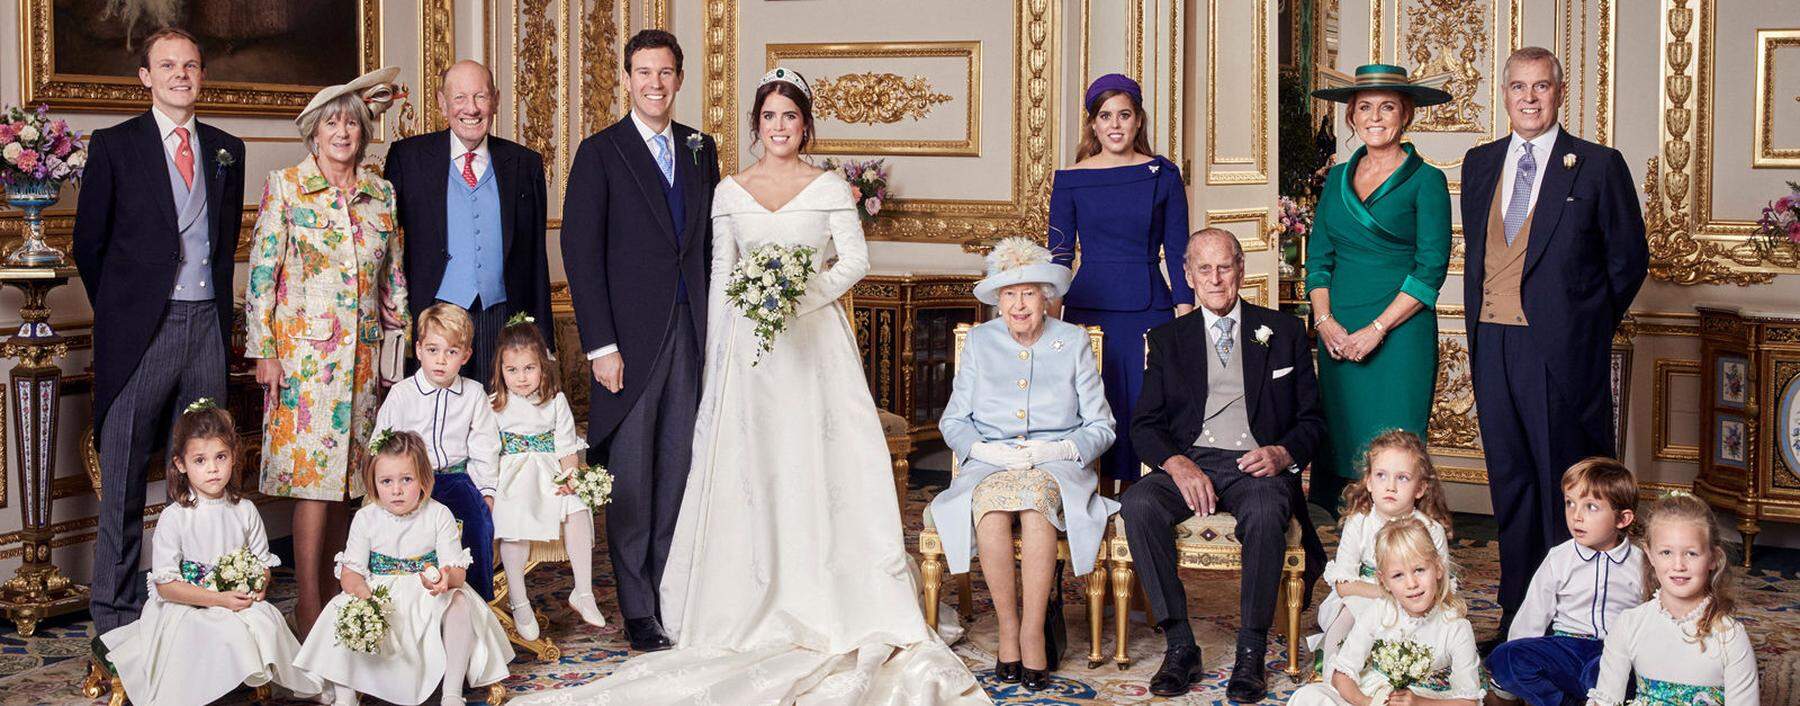 This official wedding photograph released by the Royal Communications shows Princess Eugenie and Jack Brooksbank in the White Drawing Room, Windsor Castle, Windsor